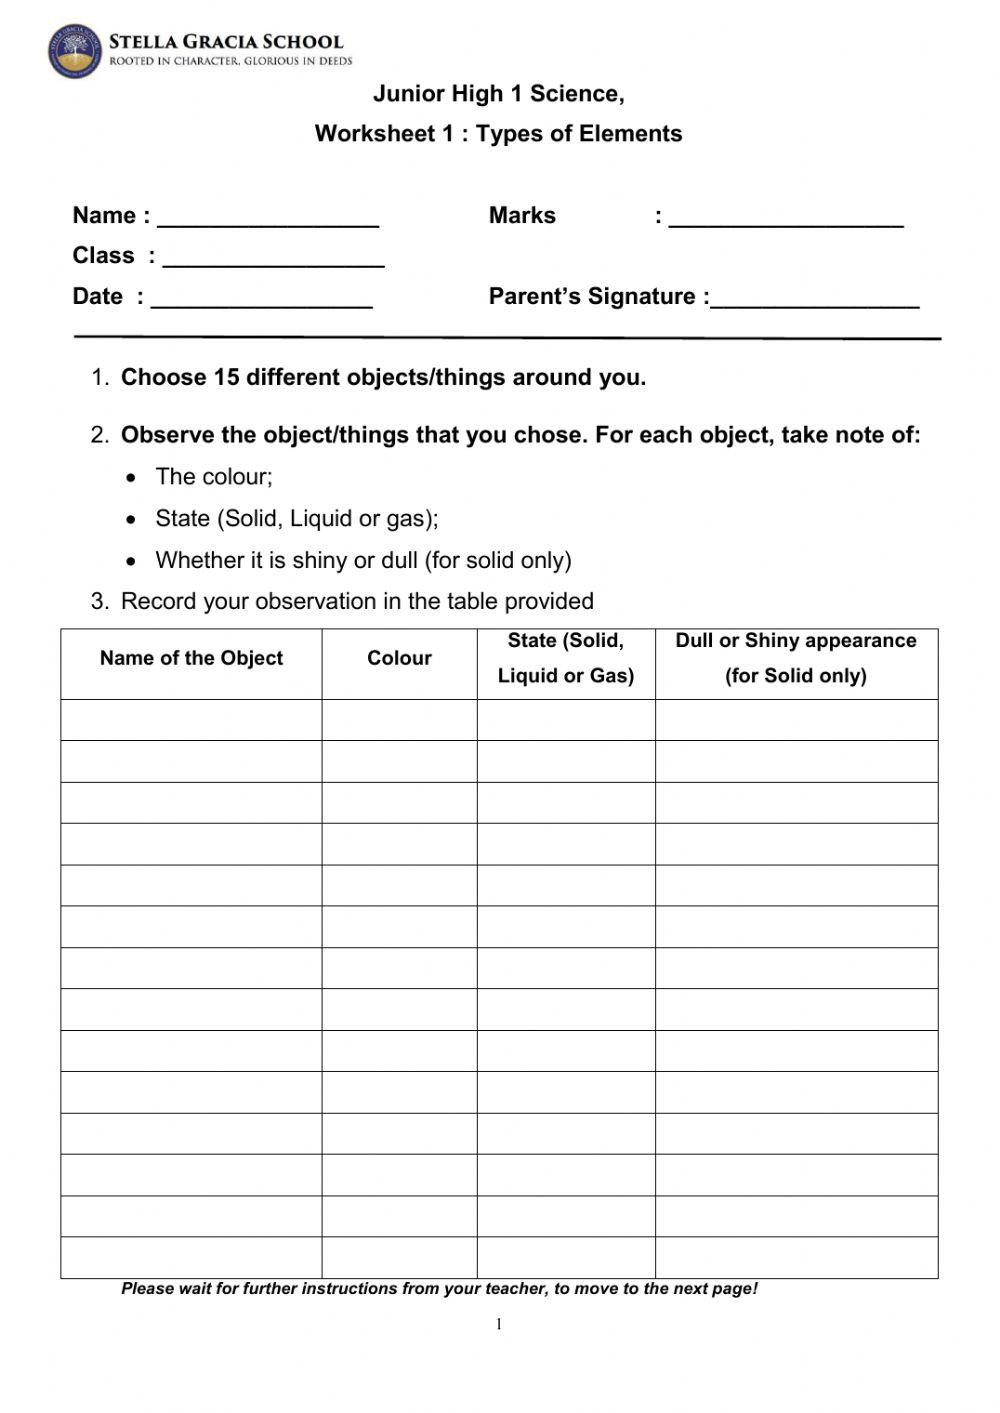 Composition Of Matter Worksheet Answers Types Of Elements Interactive Worksheet